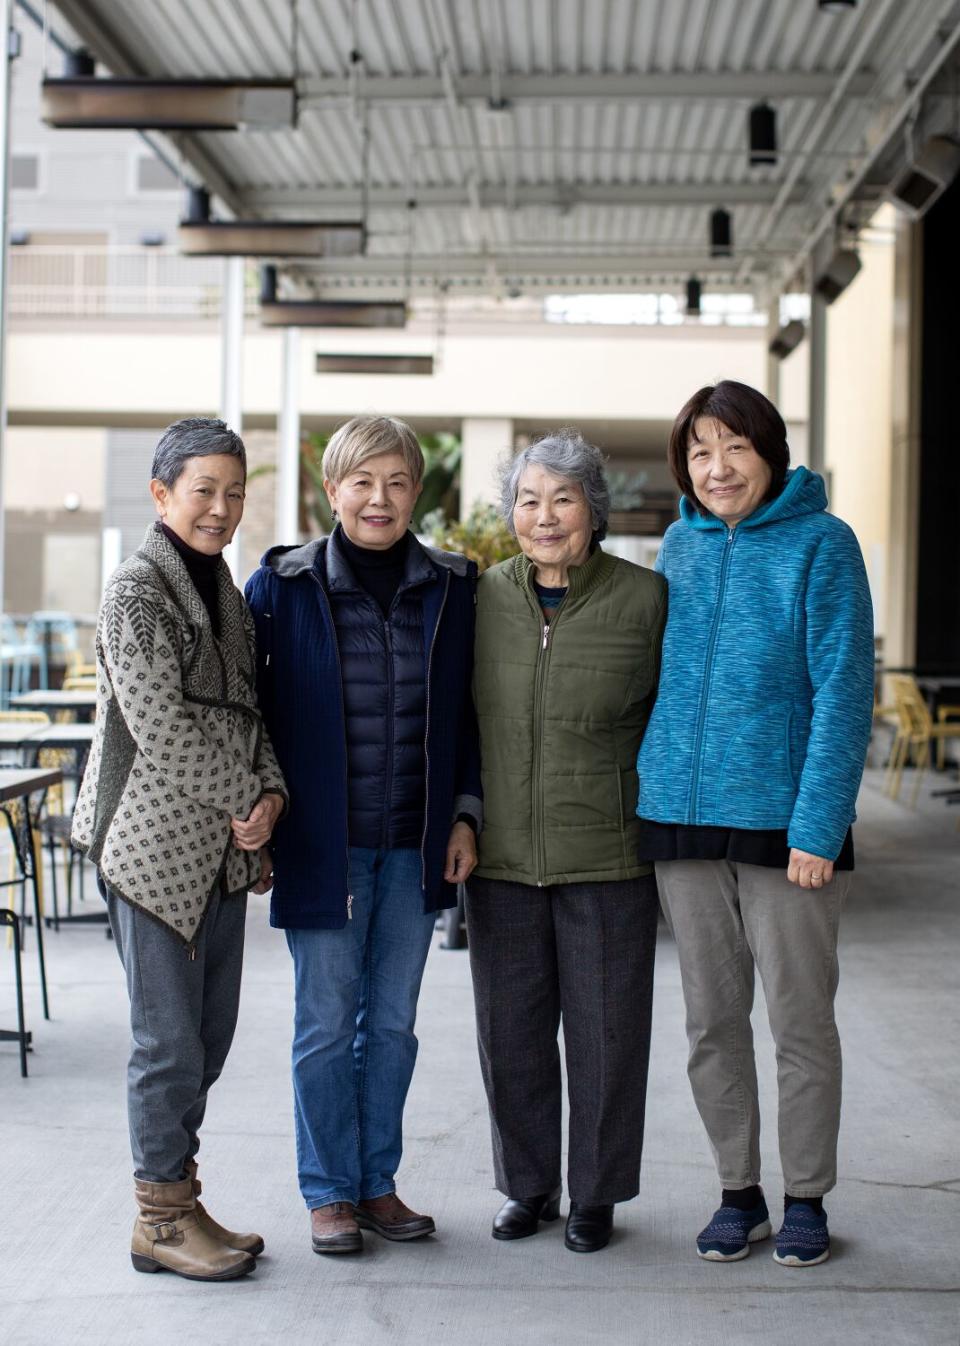 Certical image of four women standing side by side, posing for the photo, slightly smiling.